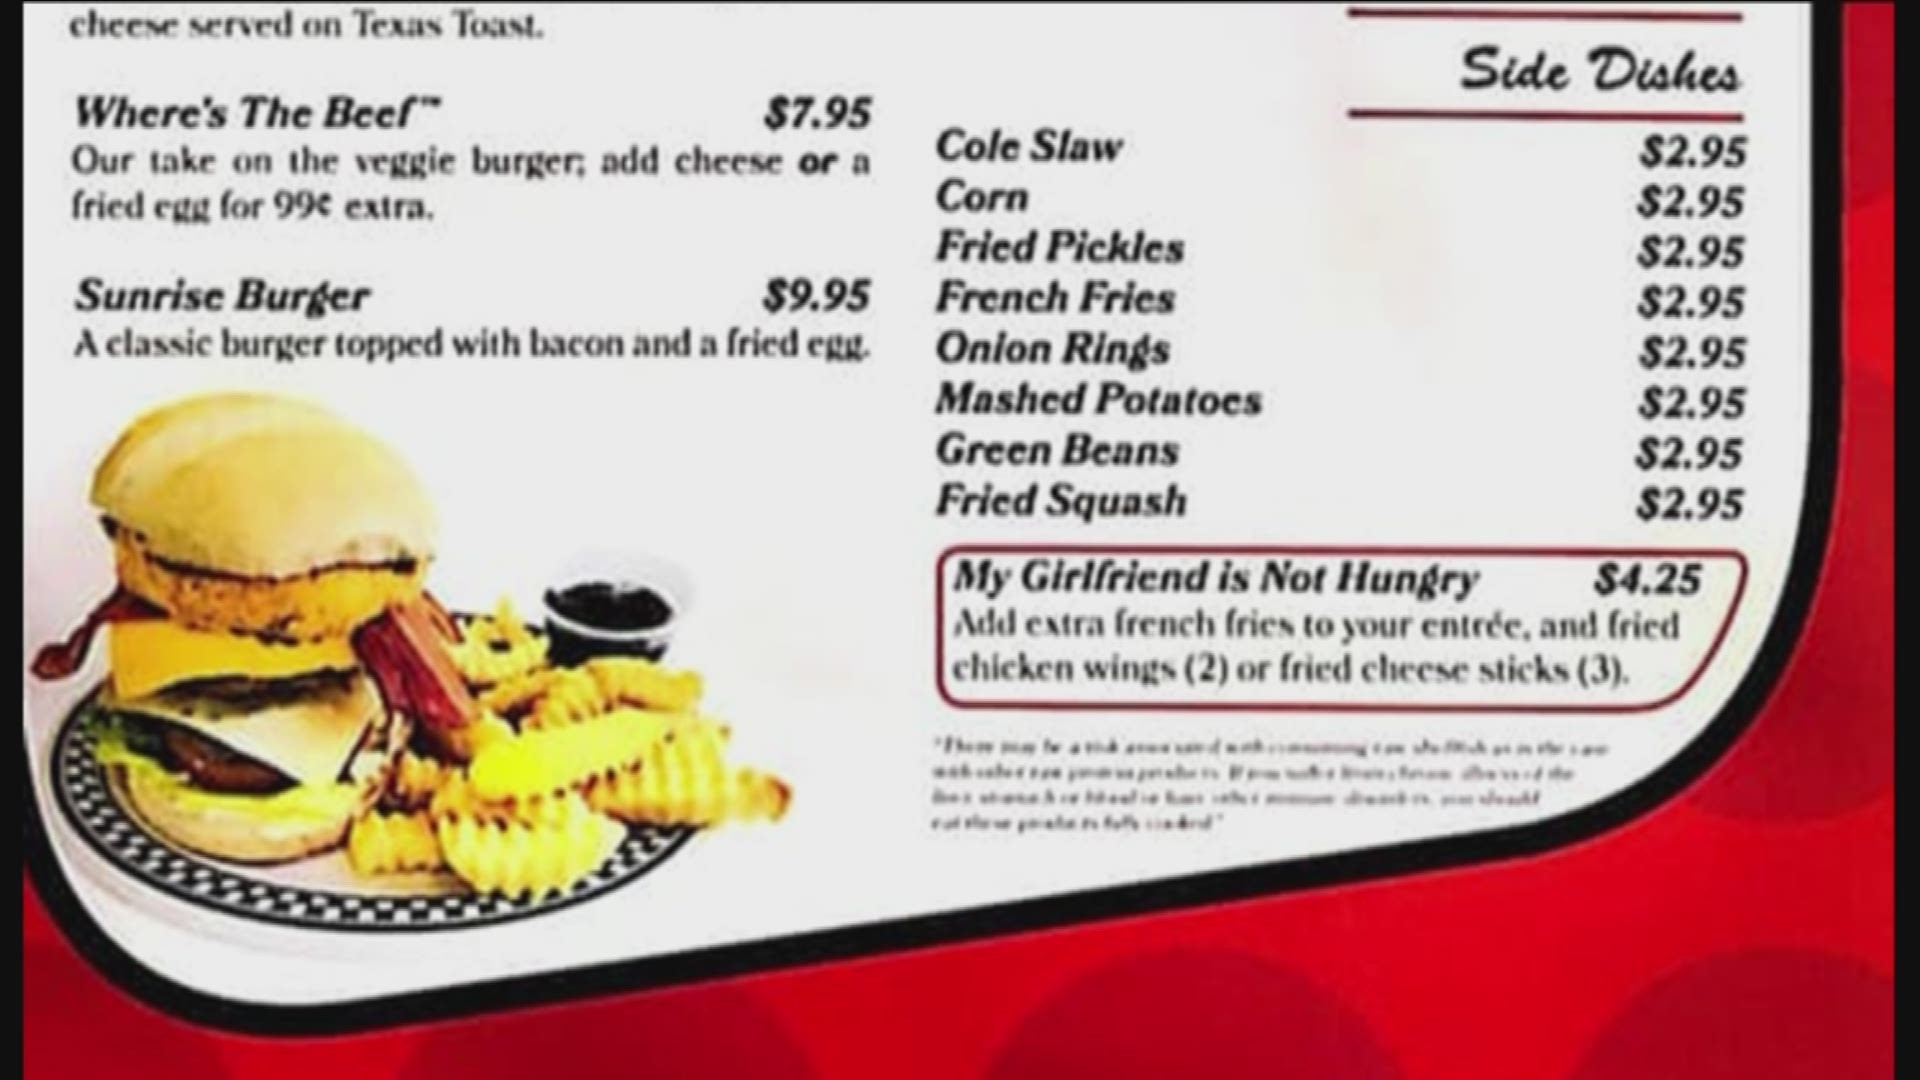 A diner goes viral for offering 'My Girlfriend's Not Hungry' option.